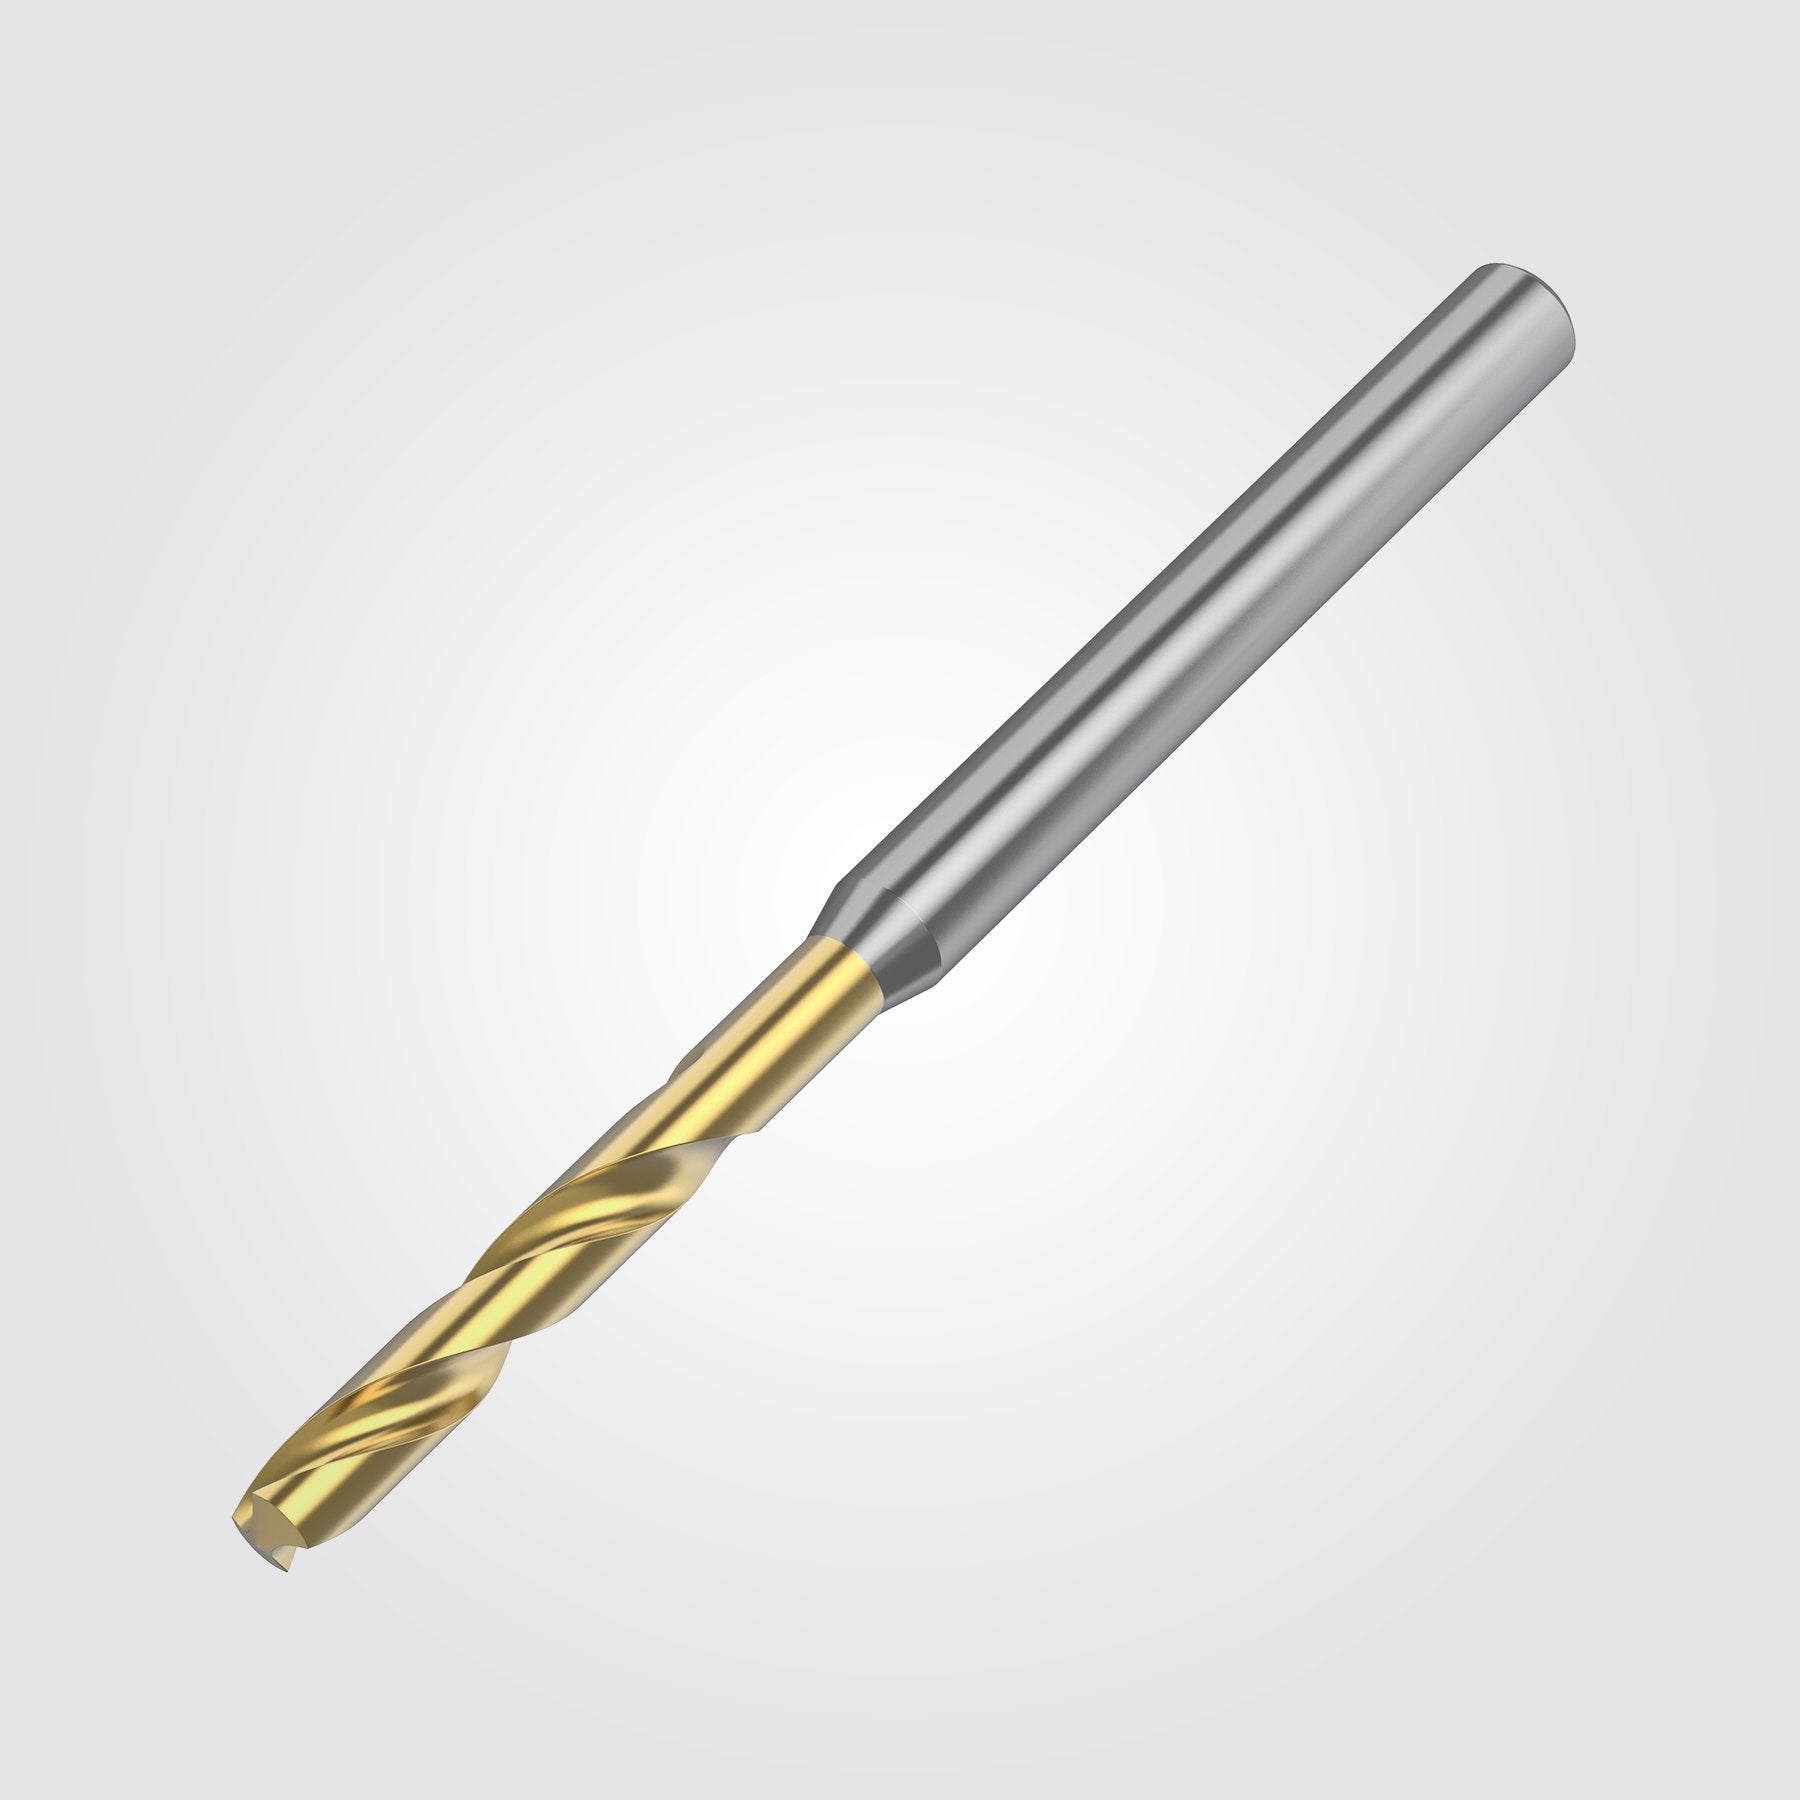 GOdrill (THROUGH COOLANT) | 15mm / .5906" / 5xD | SOLID CARBIDE DRILL | 4149350